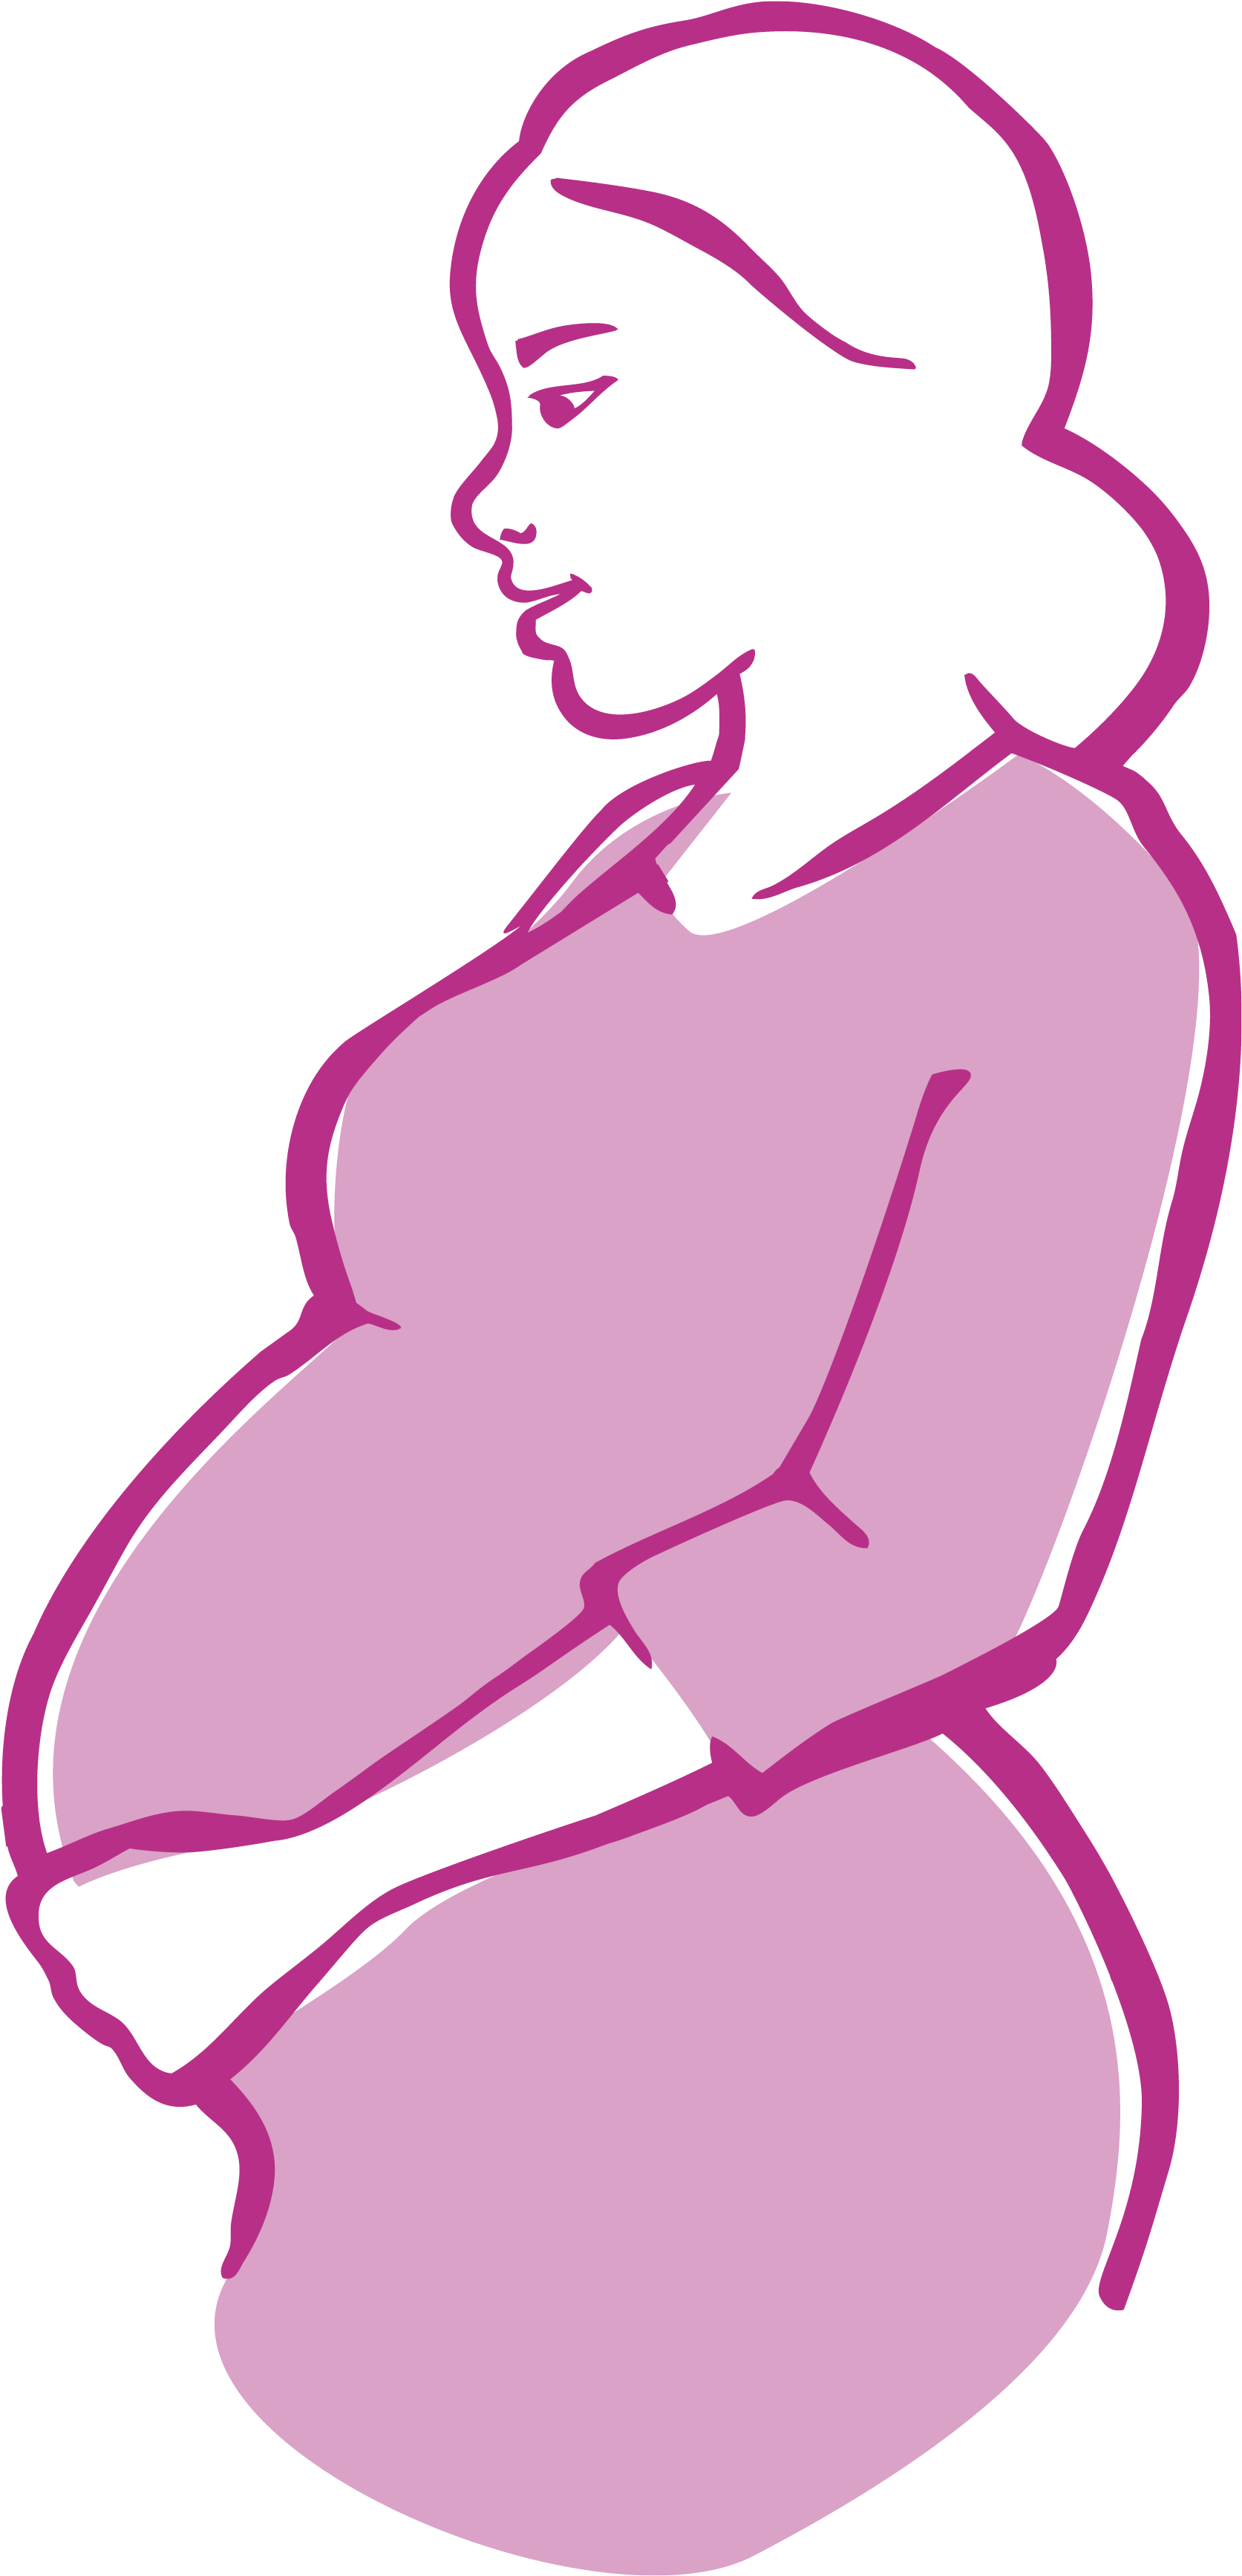 A Pregnant Woman With Her Hands On Her Stomach